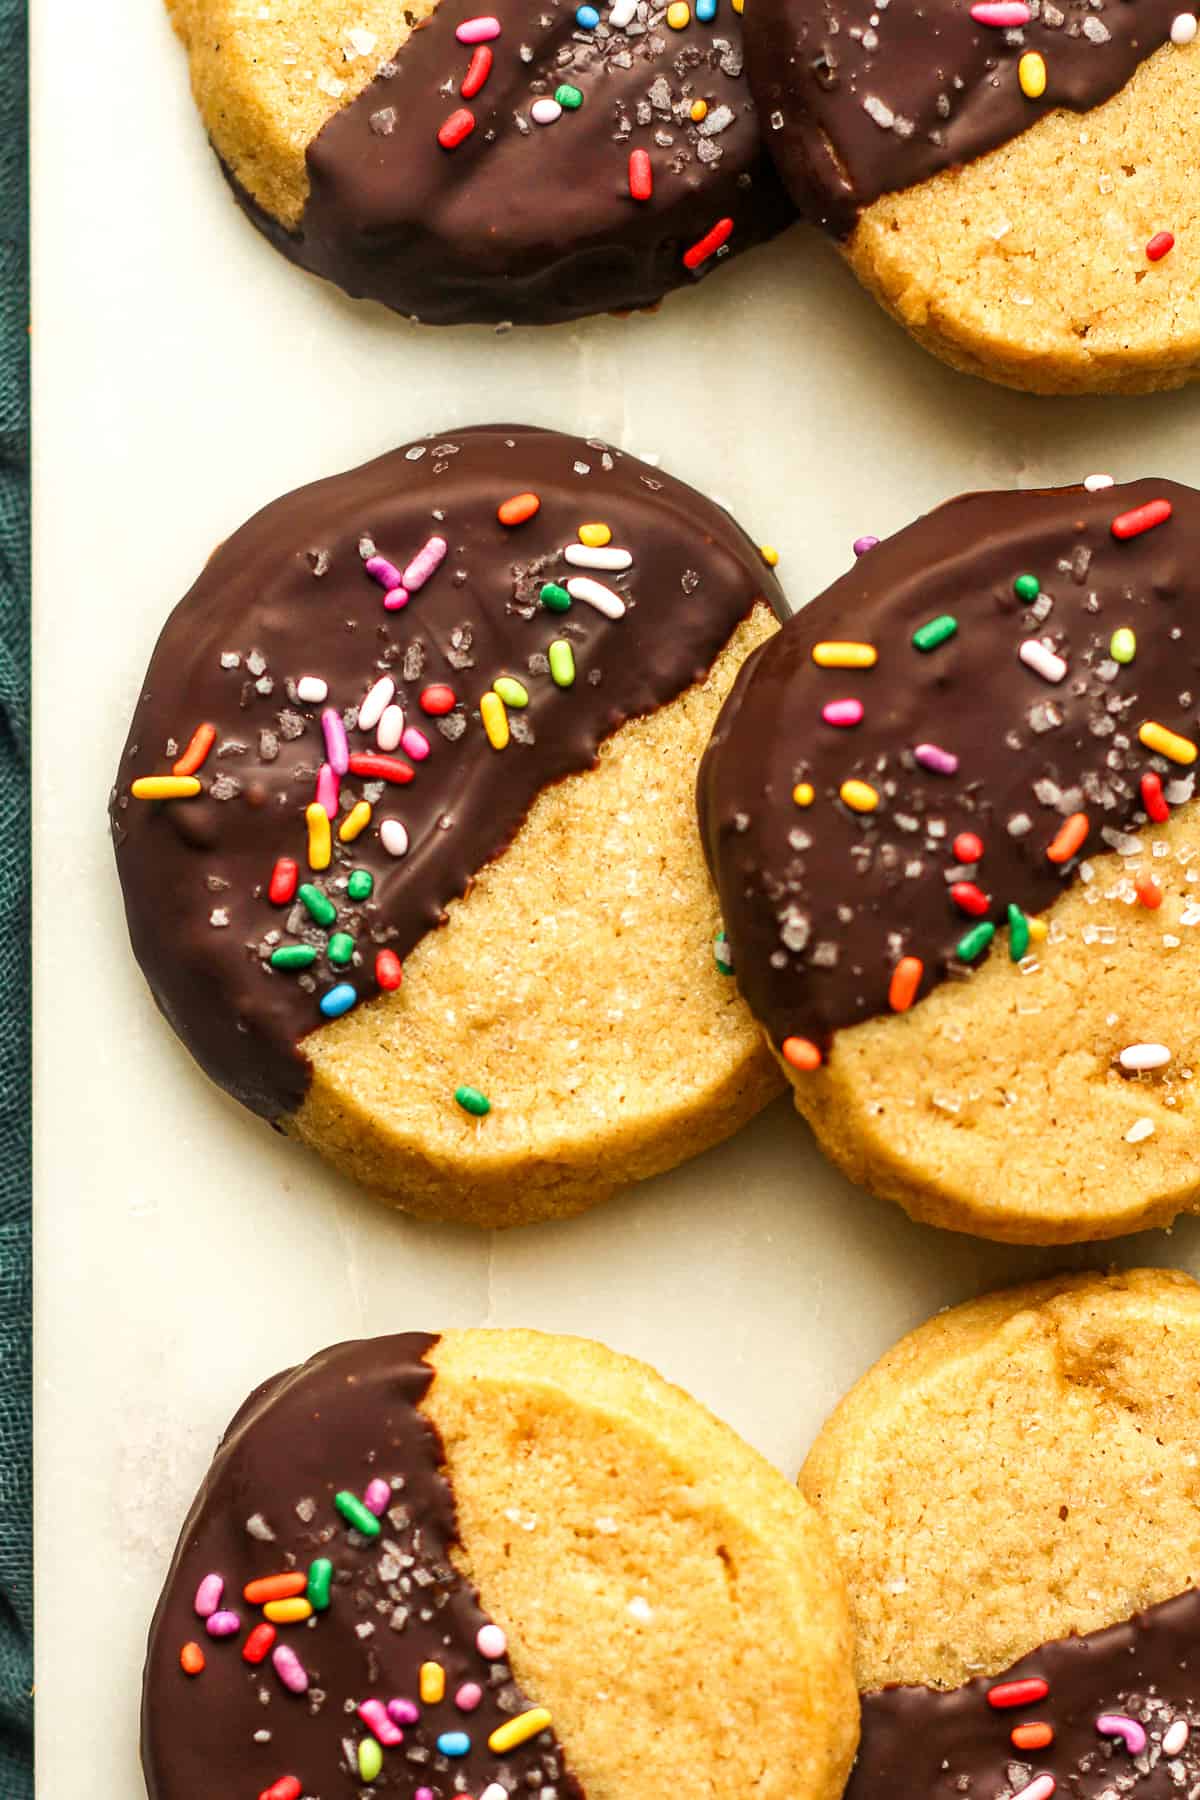 Closeup on some chocolate dipped shortbread cookies with sprinkles.